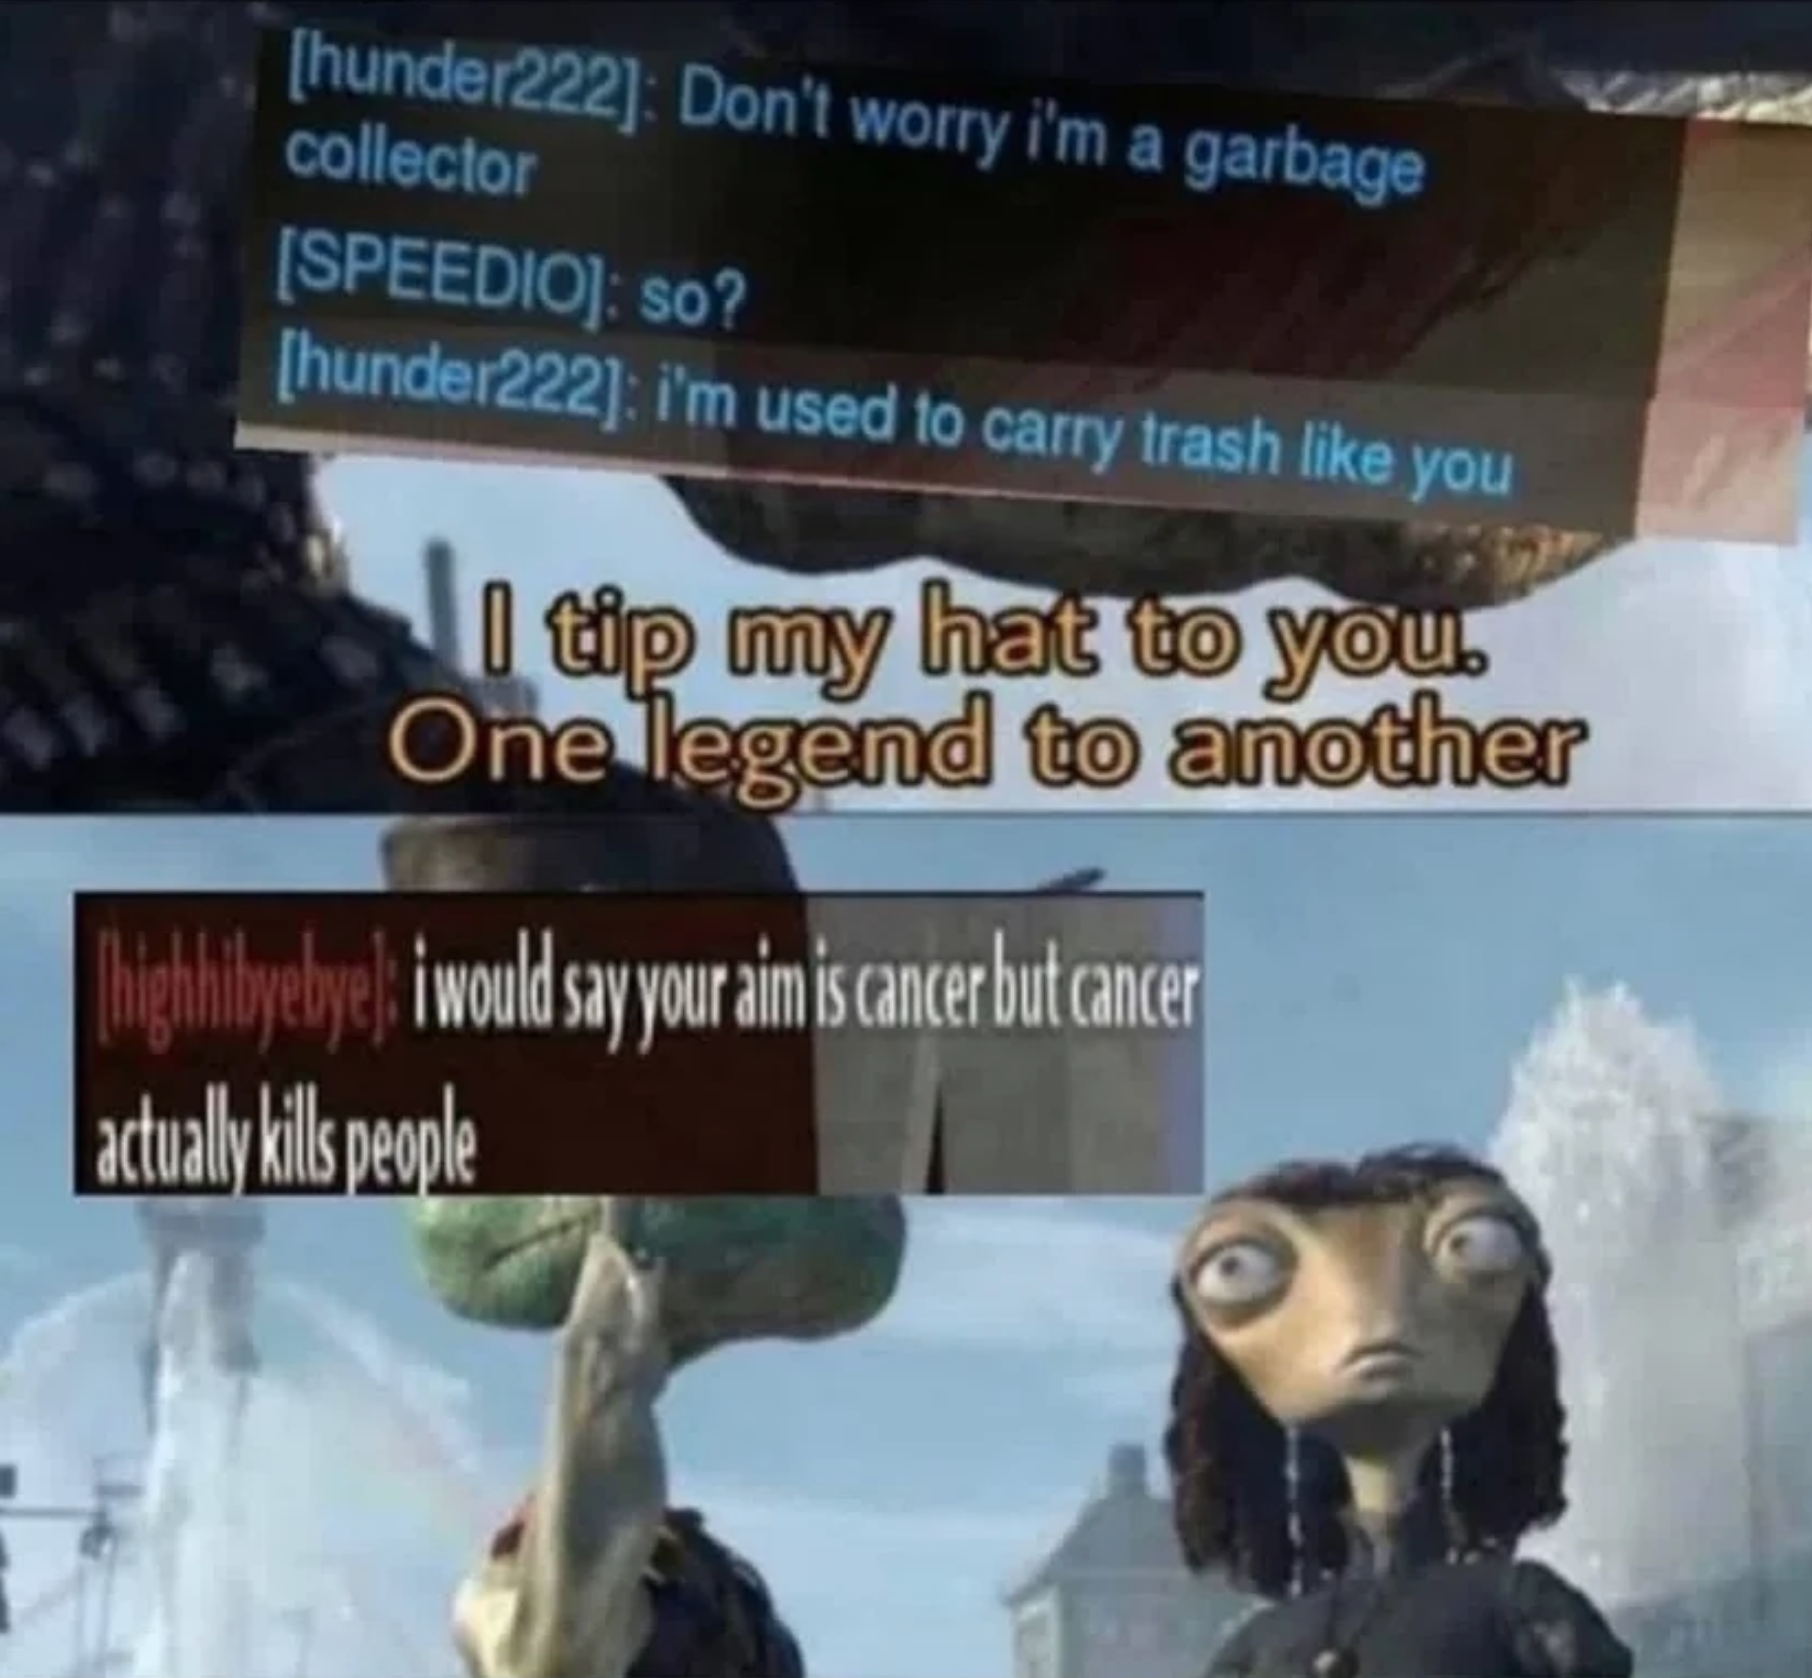 funny gaming memes - tip my hat to you one legend - hunder222 Don't worry i'm a garbage collector Speedio so? hunder222 i'm used to carry trash you I tip my hat to you. One legend to another Tighibyebye i would say your aim is cancer but cancer actually k